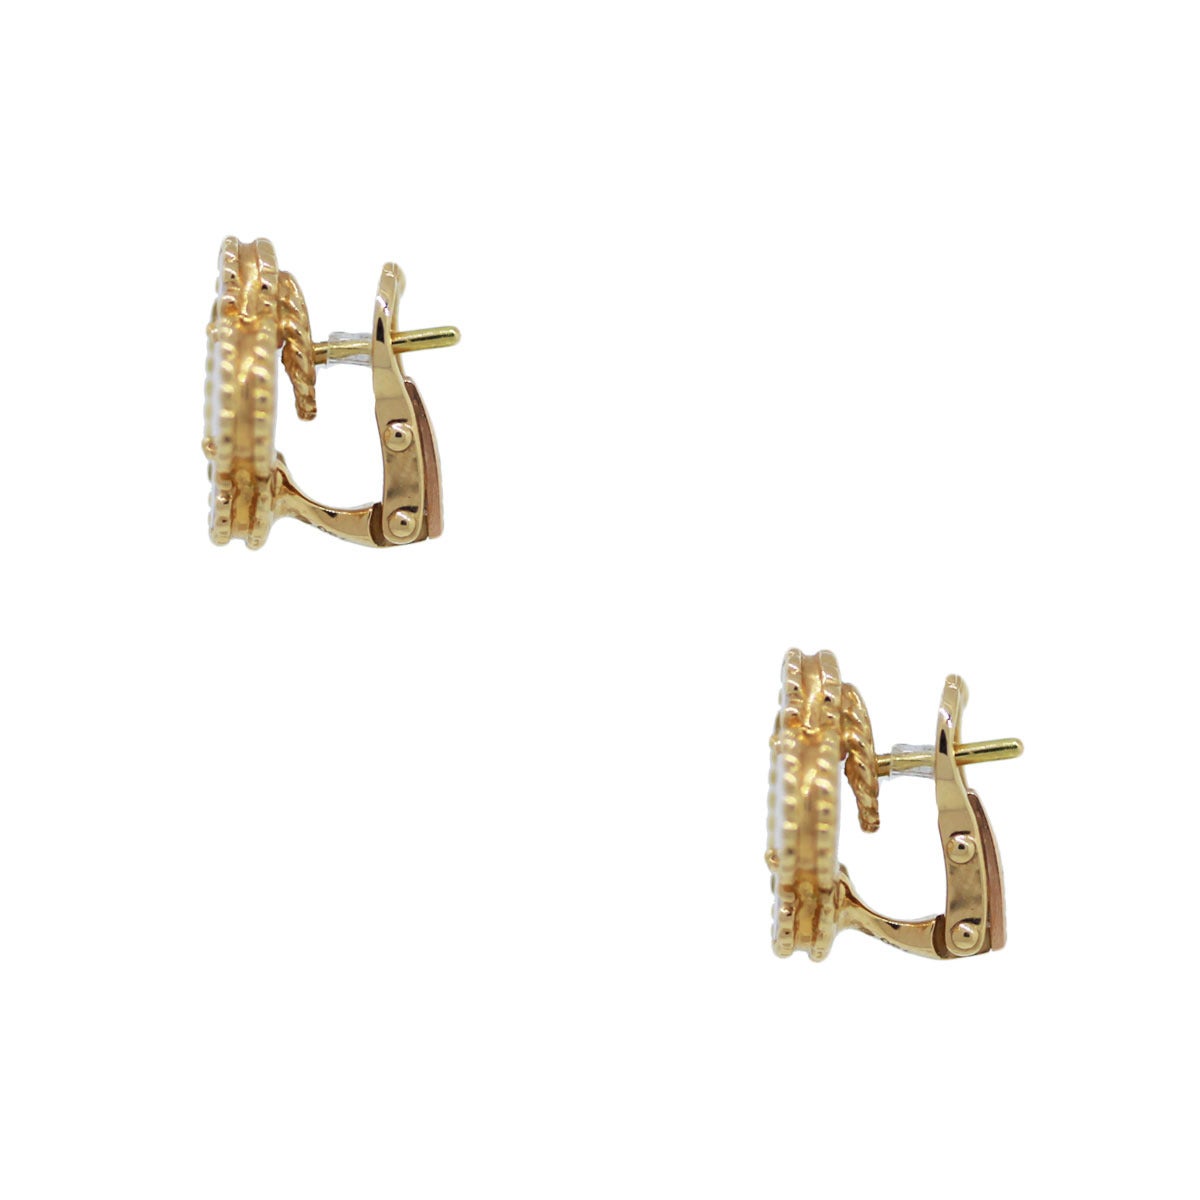 Style :Van Cleef & Arpels Ear Clips
Collection : Vintage Alhambra
Material: 18k Yellow Gold
Gemstone Details: Mother of  pearl
Earring Measurements: 0.56